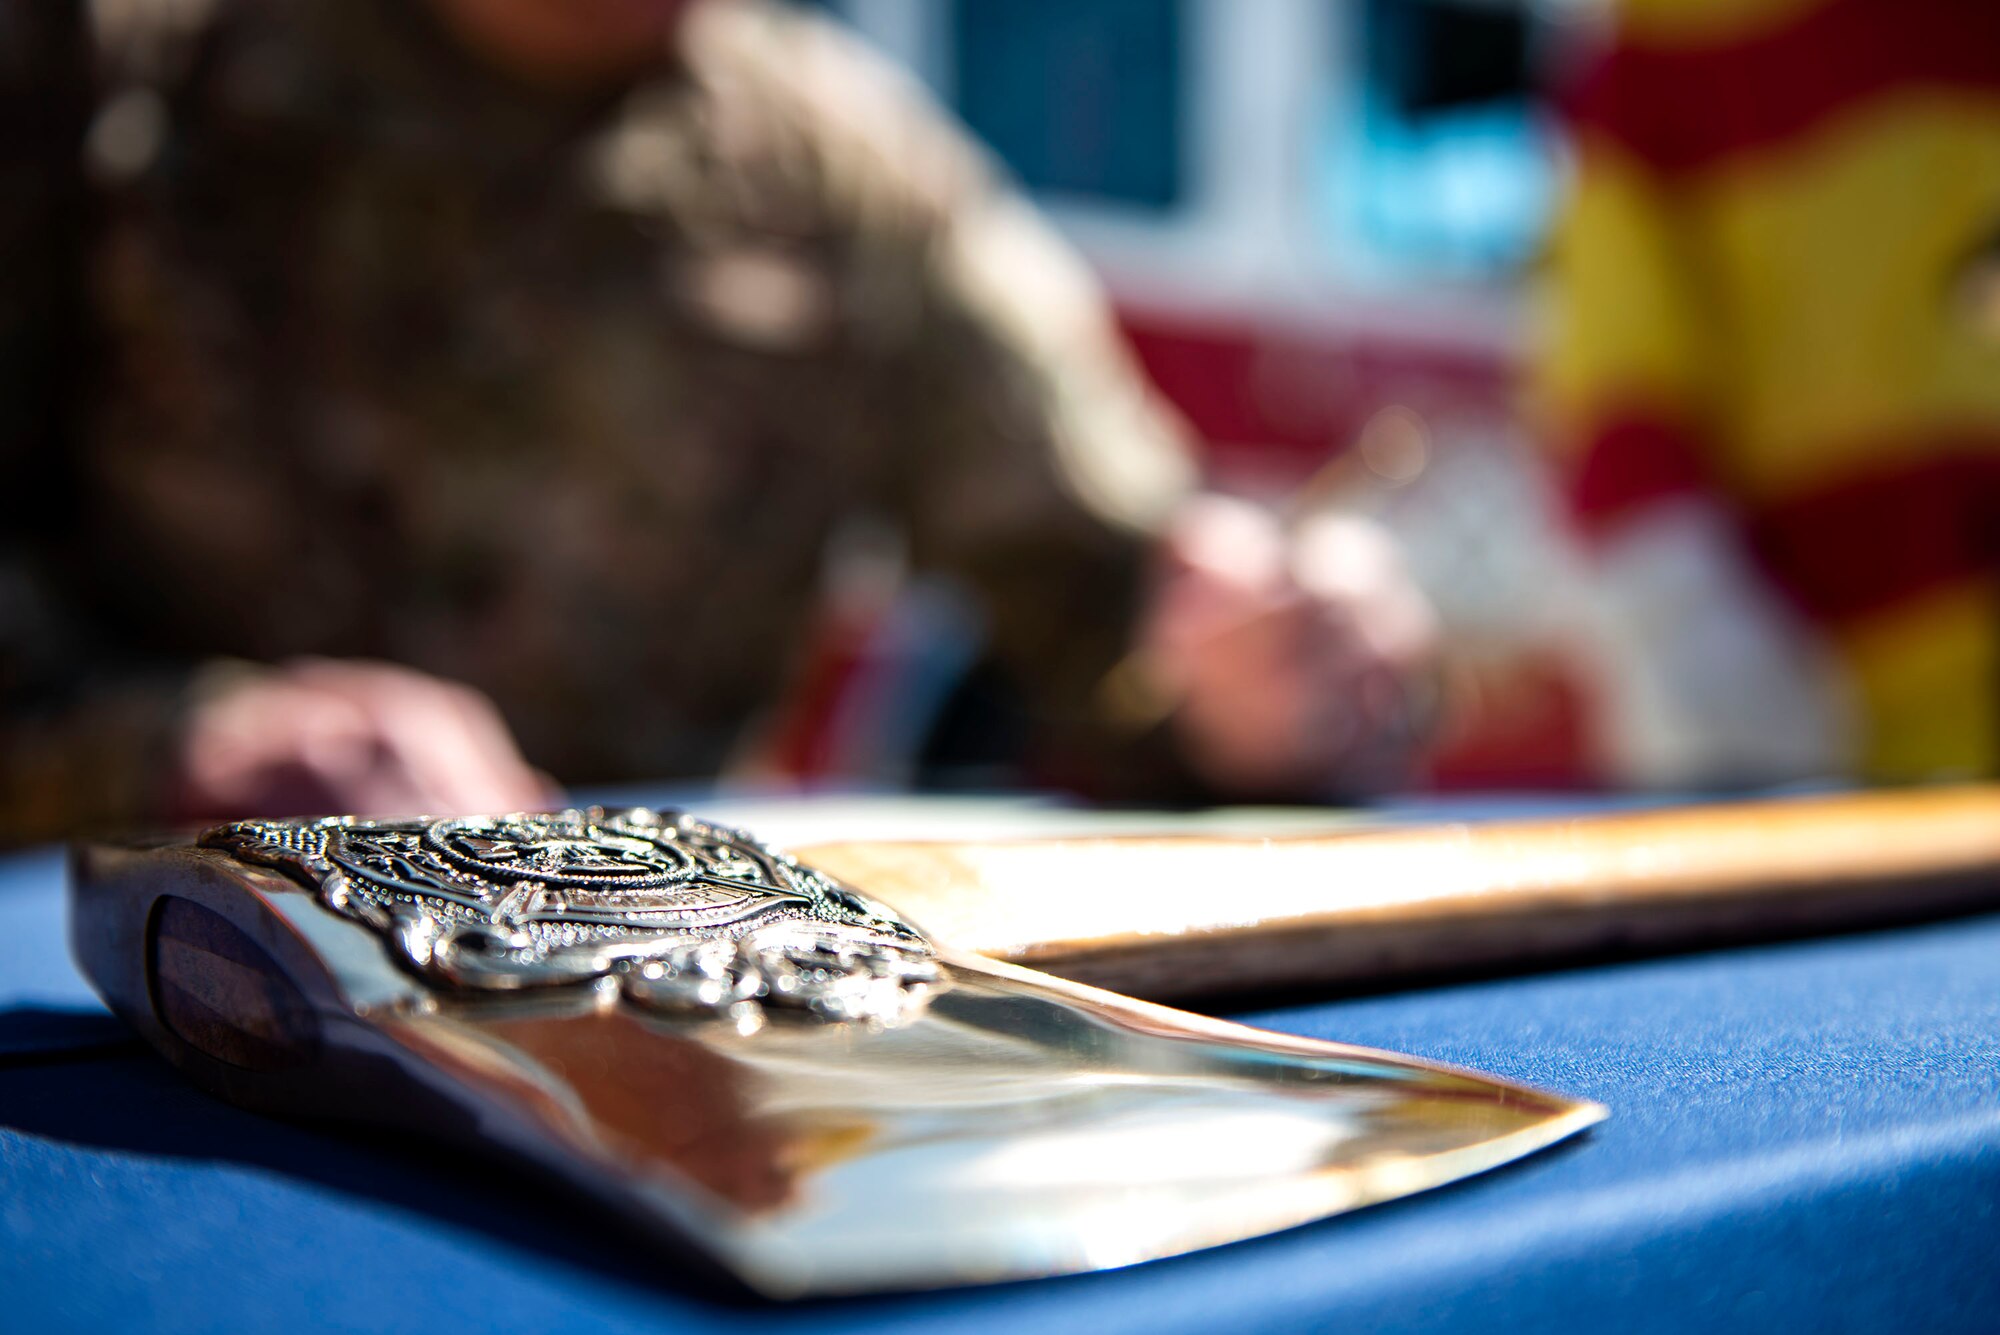 A ceremonial pickhead axe rests on a table while Col. Daniel P. Walls, 23d Wing commander, signs a Fire Prevention Week proclamation Sept. 23, 2019, at Moody Air Force Base, Ga. Walls proclaimed the week of Oct. 6-12 as Fire Prevention Week, which is designed to commemorate the sacrifices of our firefighters and teach fire safety to others. (U.S. Air Force photo by Senior Airman Erick Requadt)